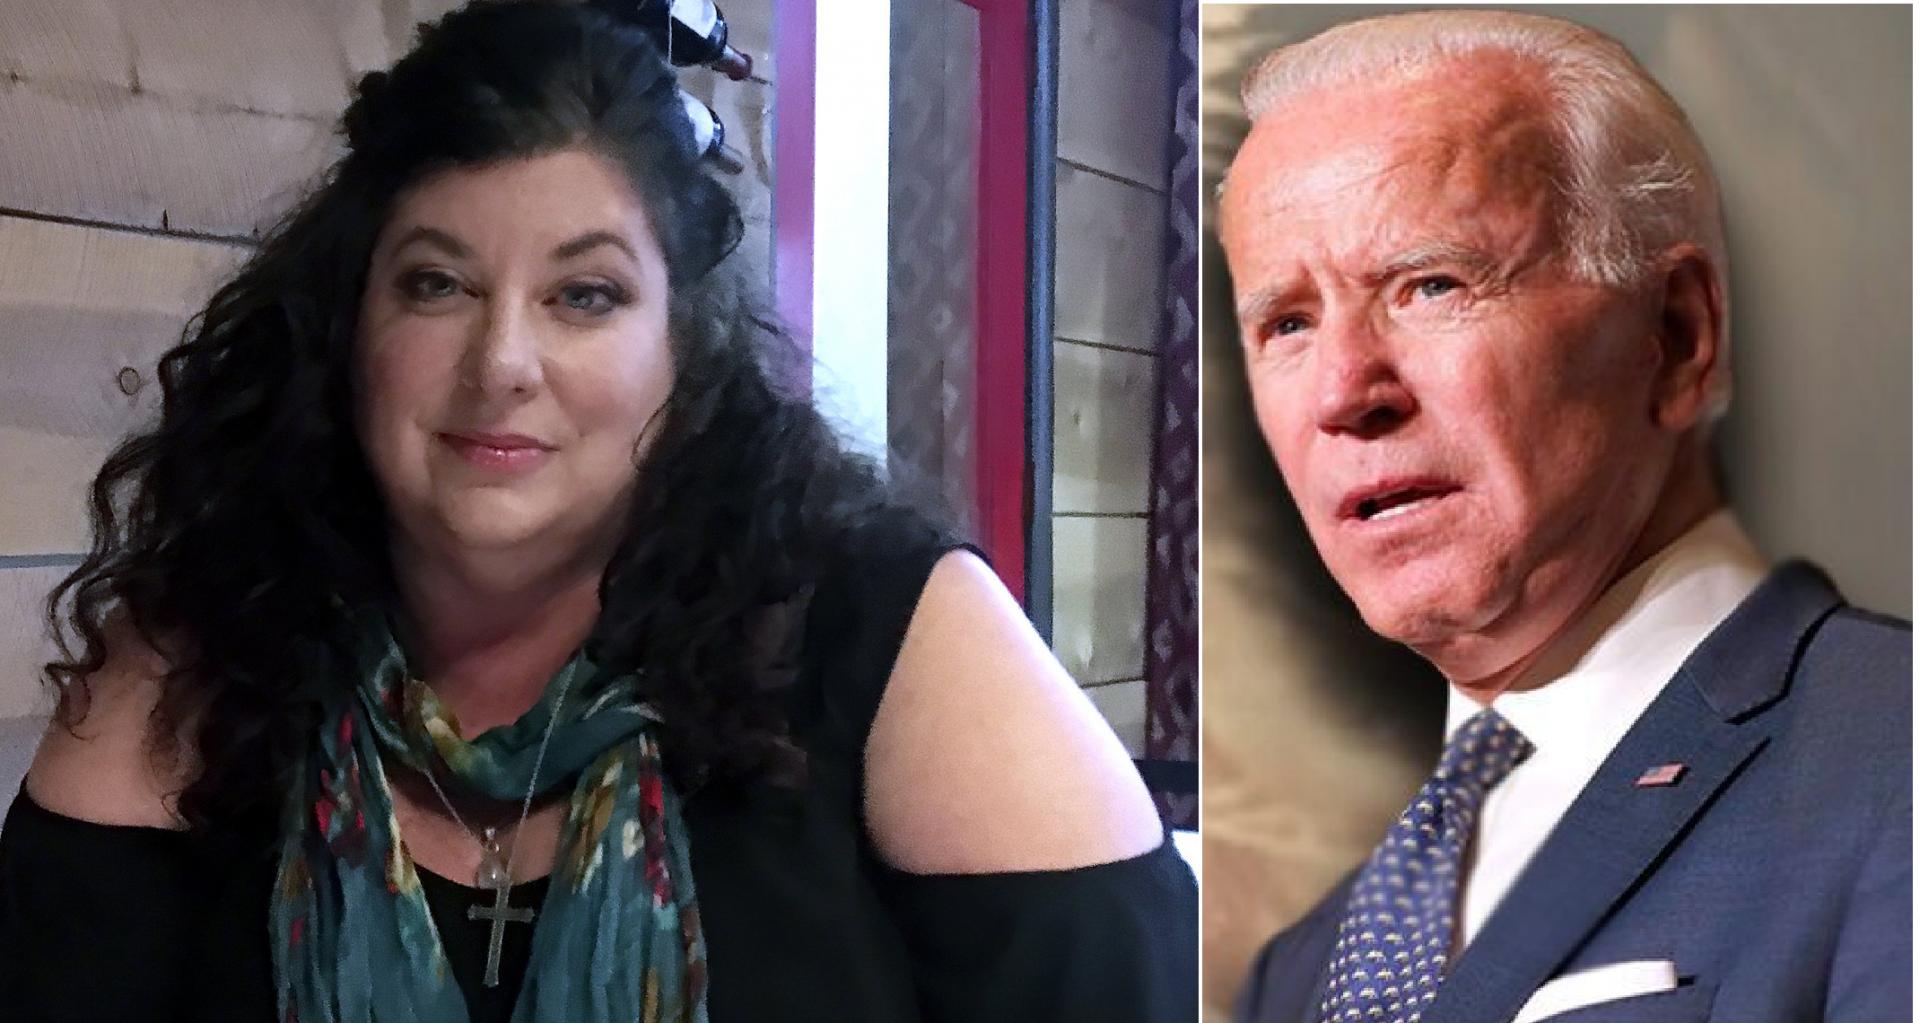 Tara Reade and Joe Biden's sexual assault and harassment - the story no end yet